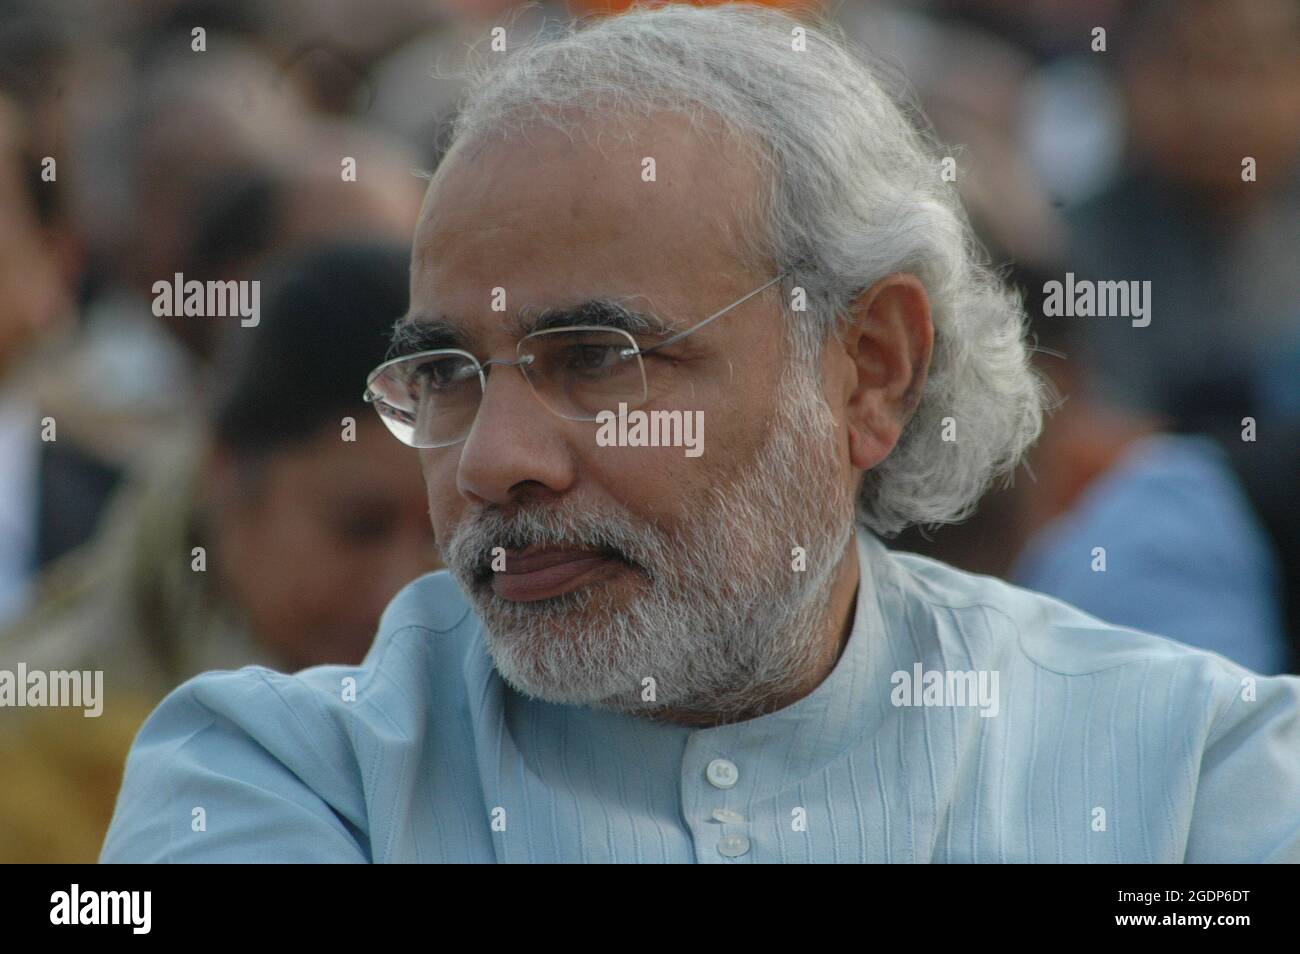 Gujarat Chief Minister Narendra Modi during a massive drill by RSS Cadres  in New Delhi, India. Photo by Sondeep Shankar Stock Photo - Alamy